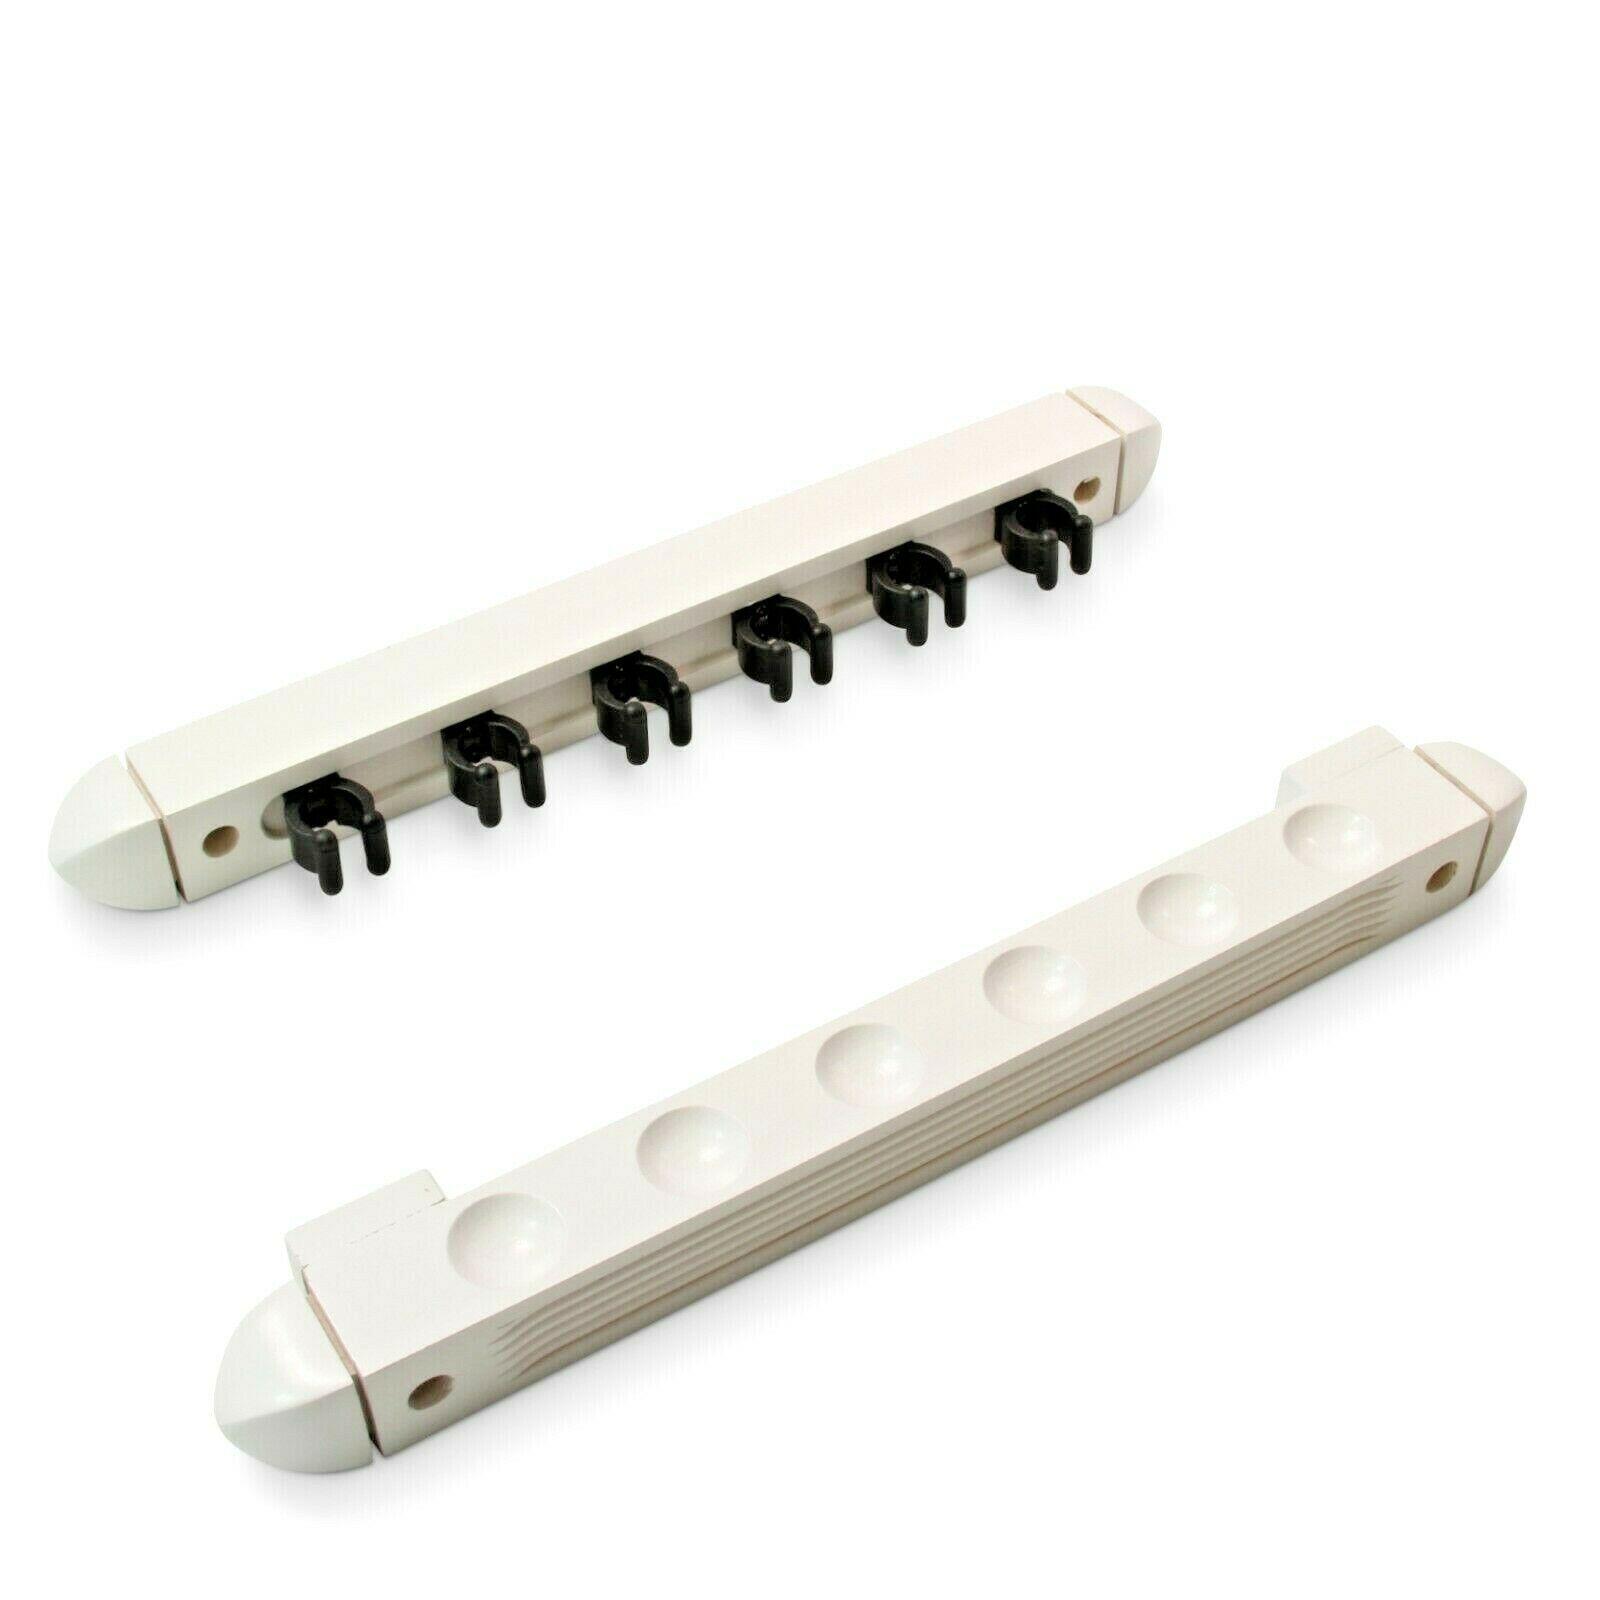 6 CUE SNOOKER/POOL WOODEN CUE RACK - WHITE 1/5